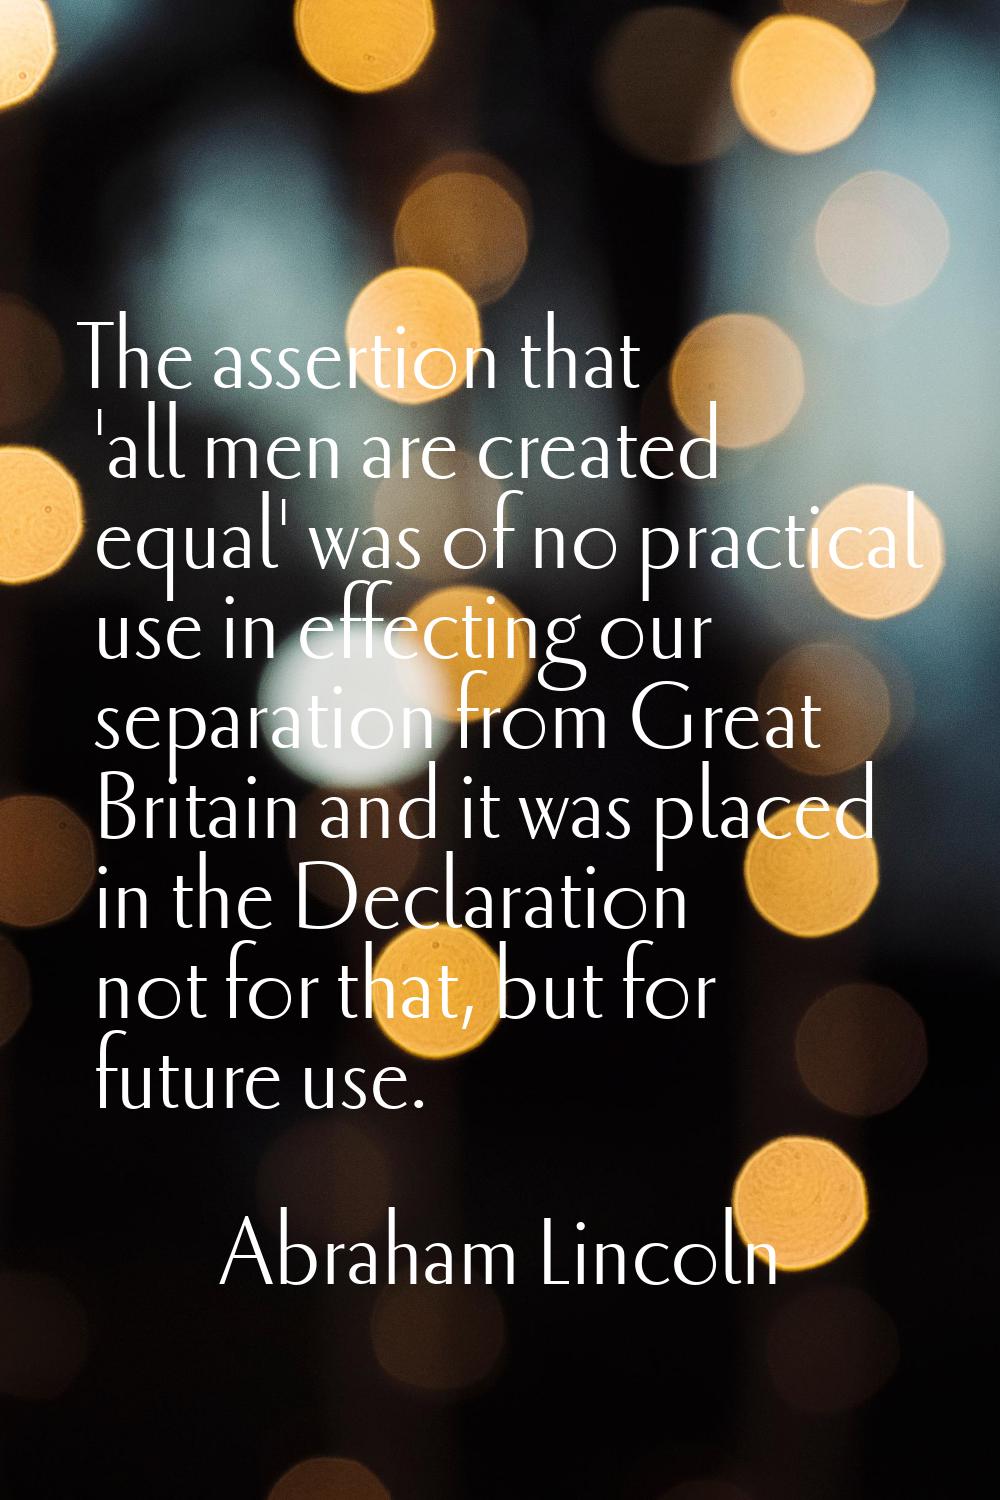 The assertion that 'all men are created equal' was of no practical use in effecting our separation 